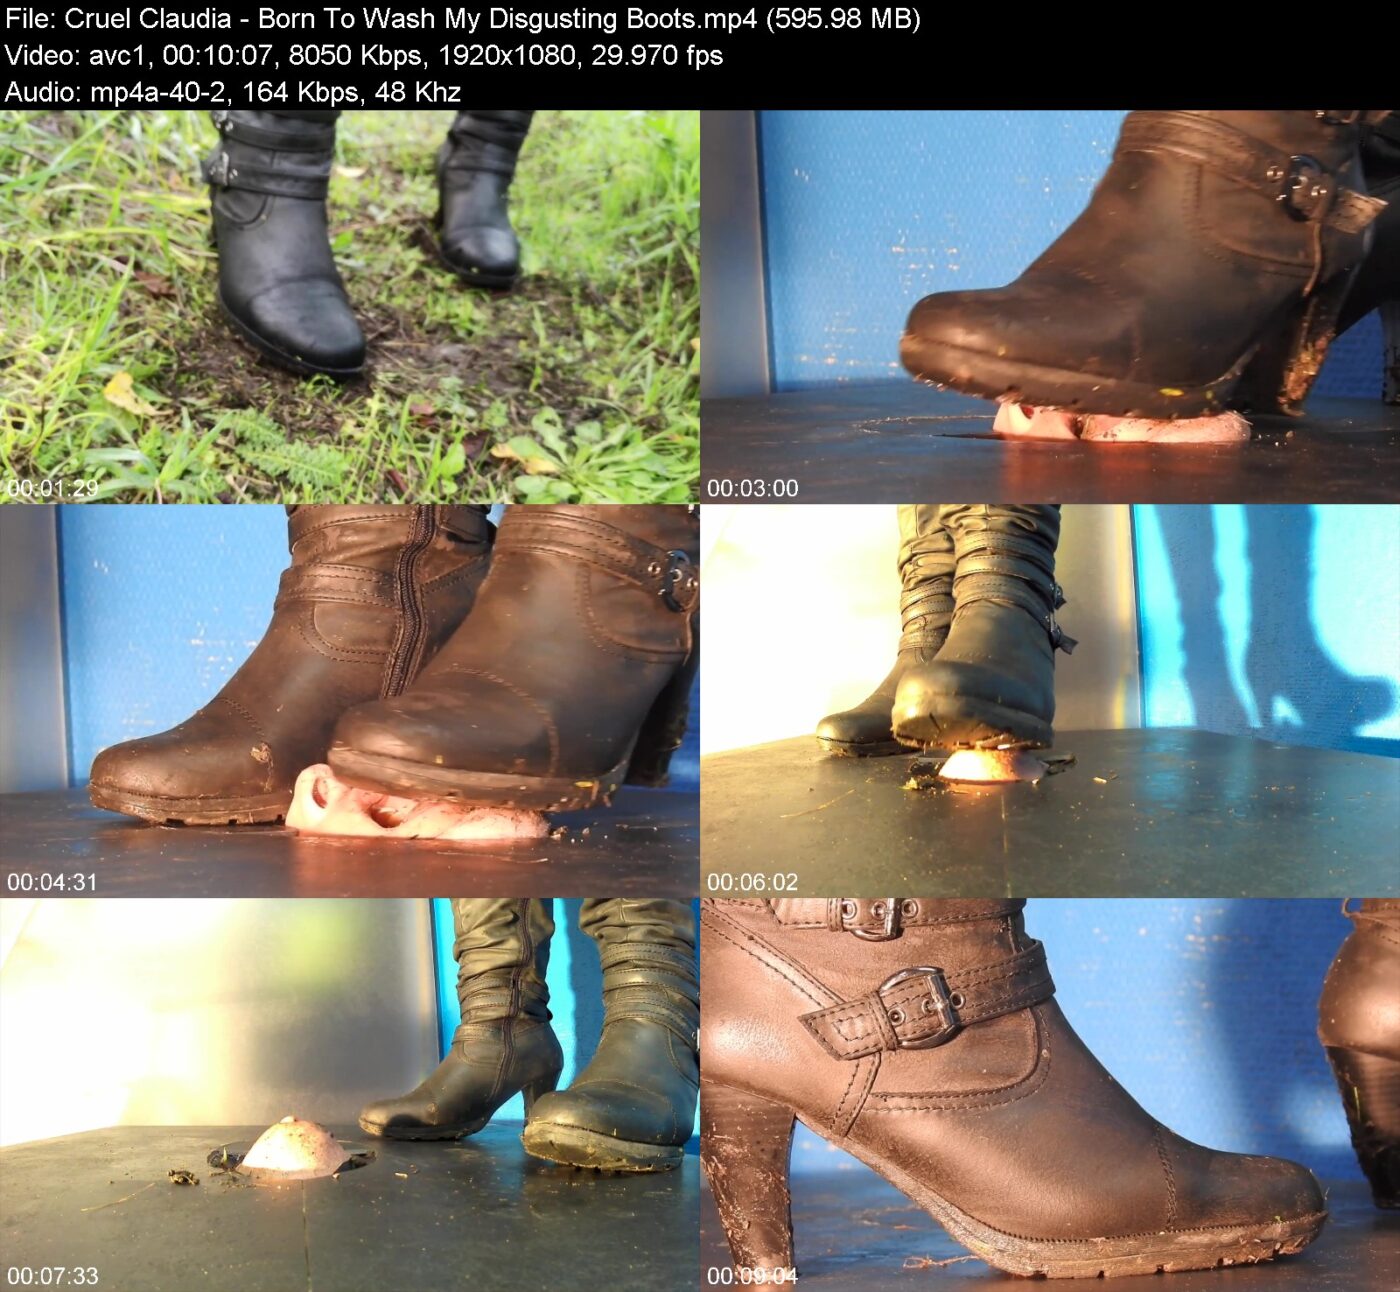 Actress: Cruel Claudia. Title and Studio: Born To Wash My Disgusting Boots